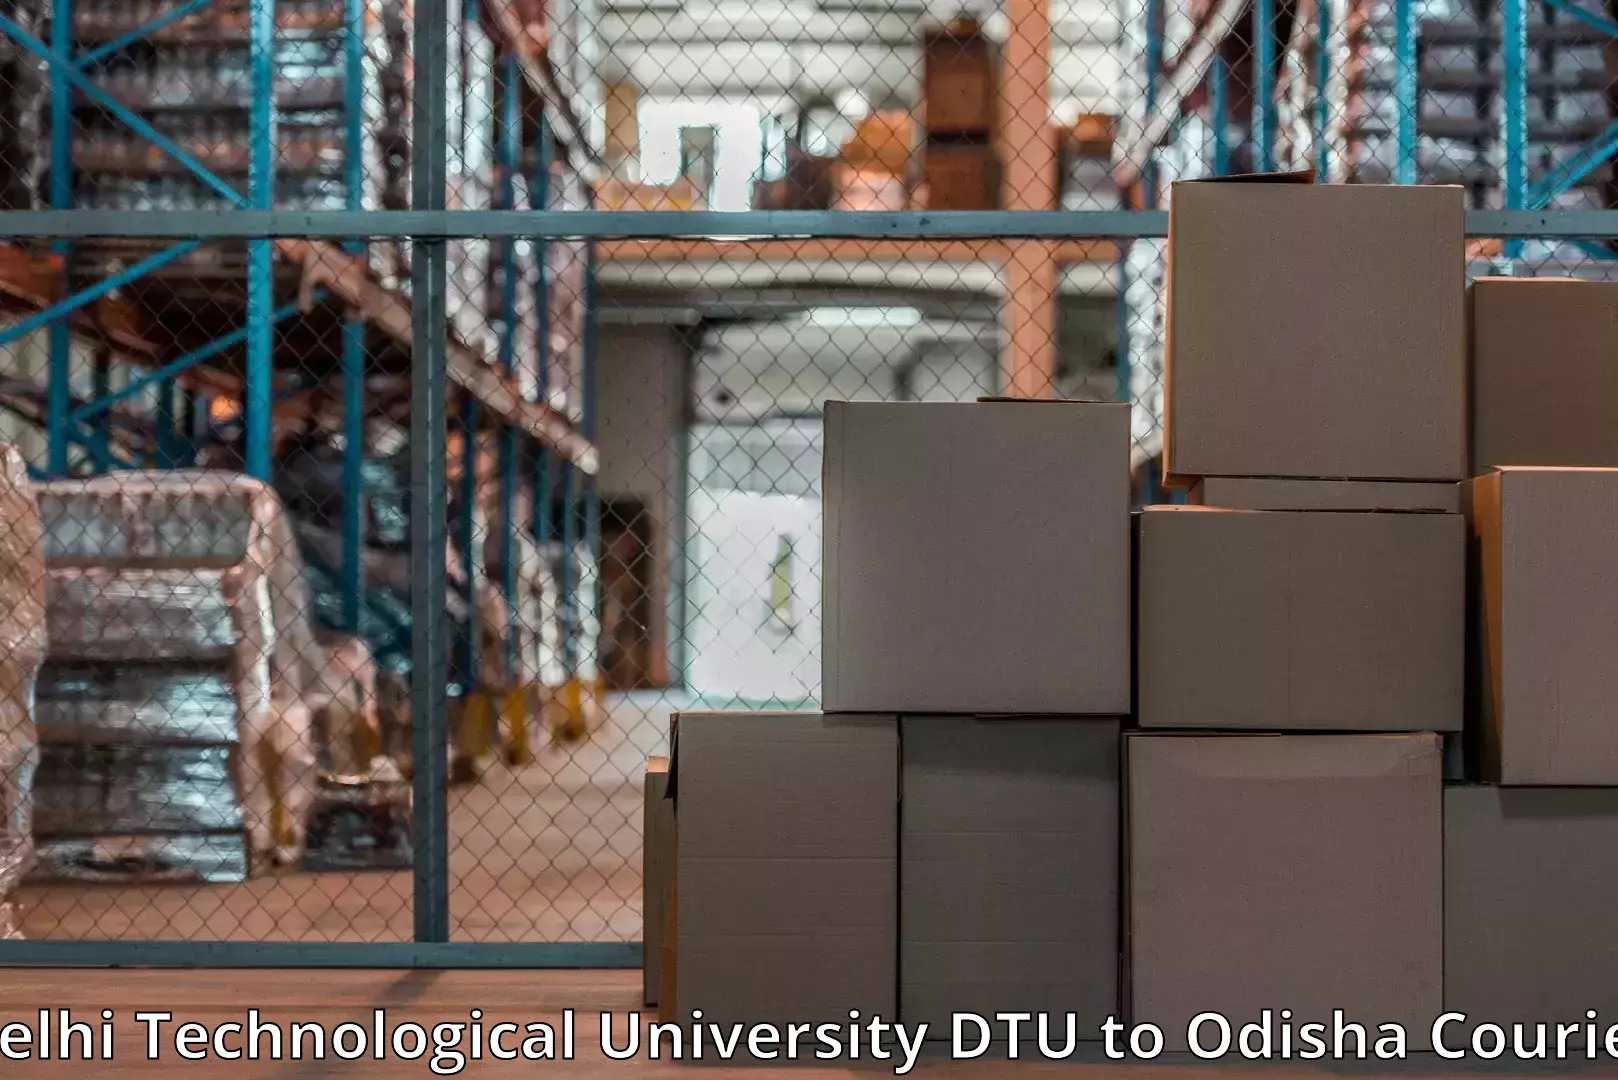 Professional packing services in Delhi Technological University DTU to Paradip Port